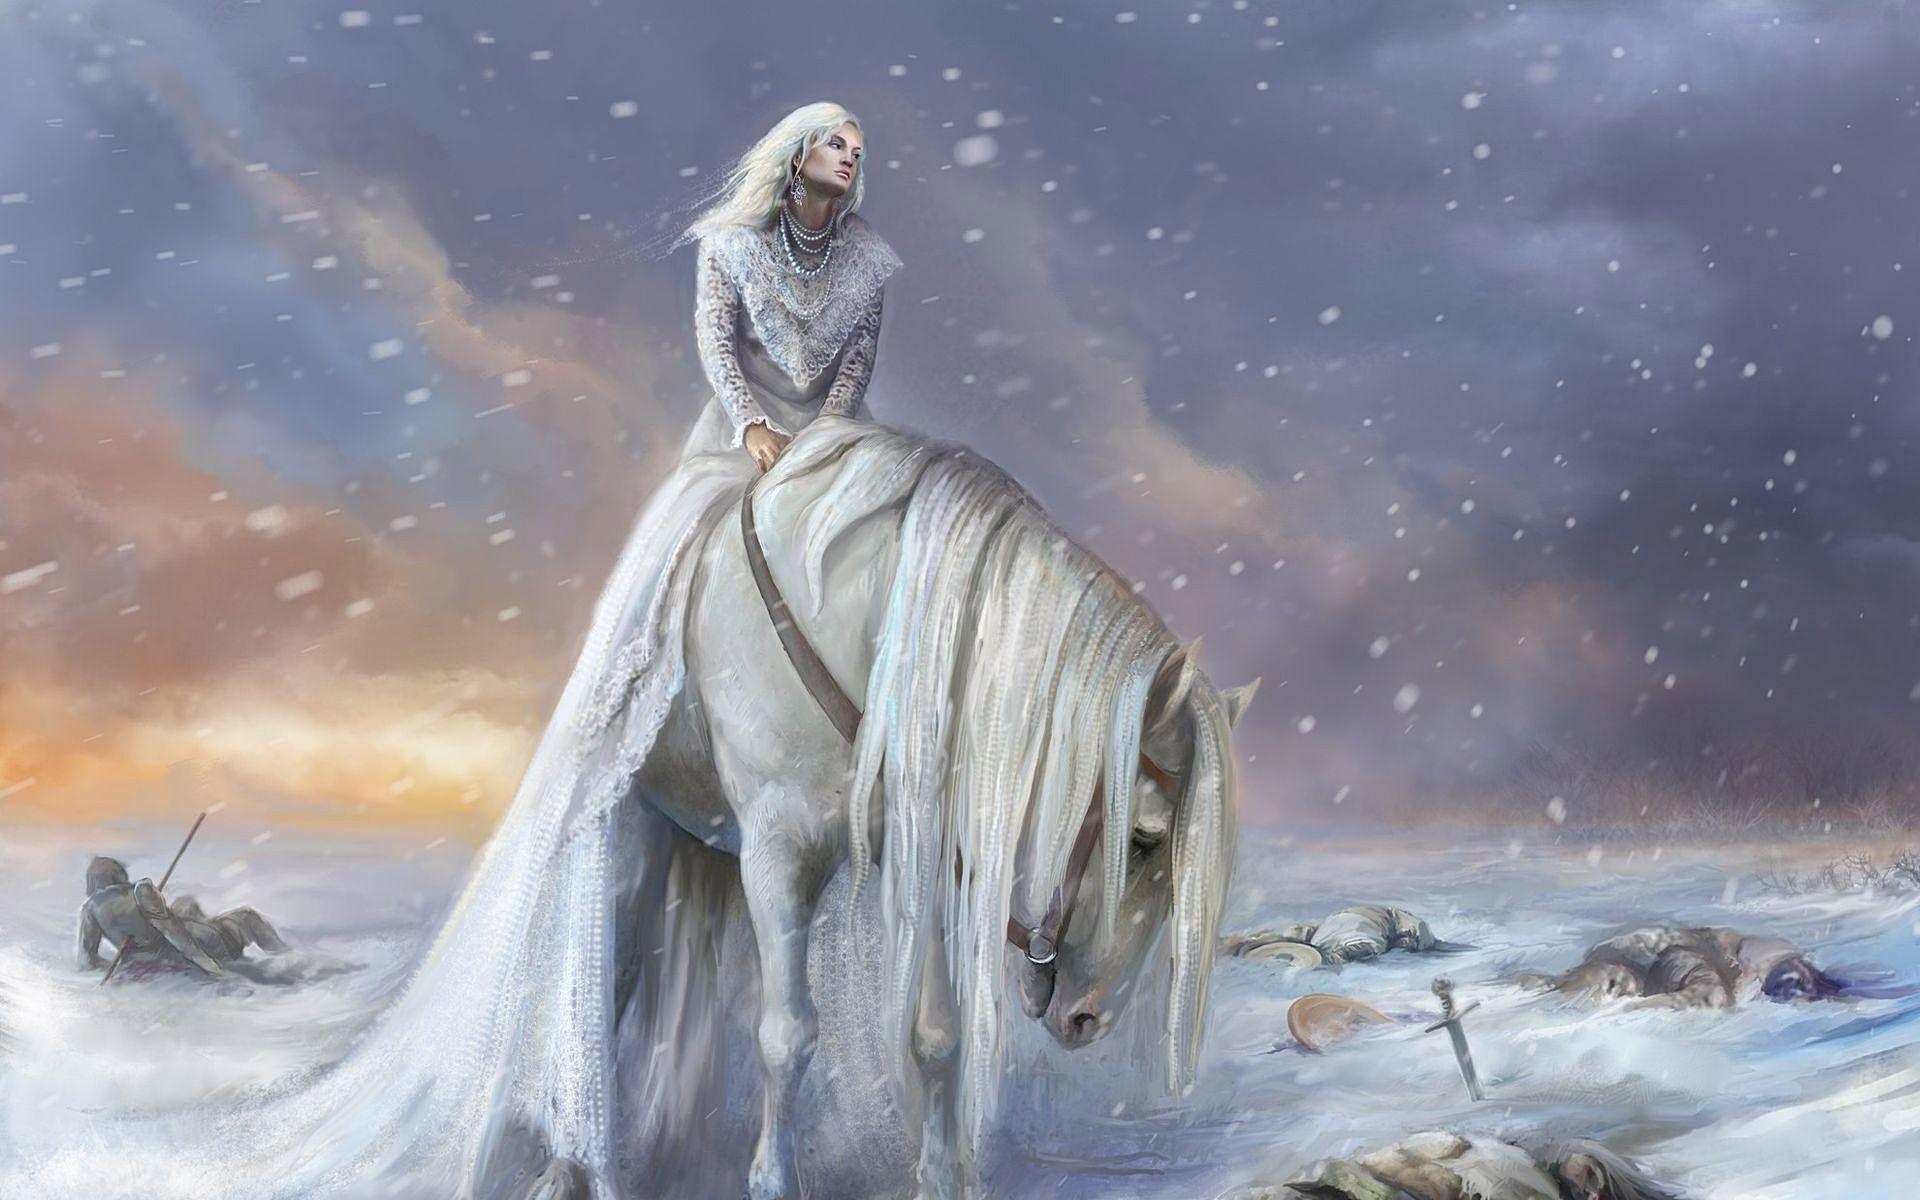 Ice princess on the white horse Wallpaper